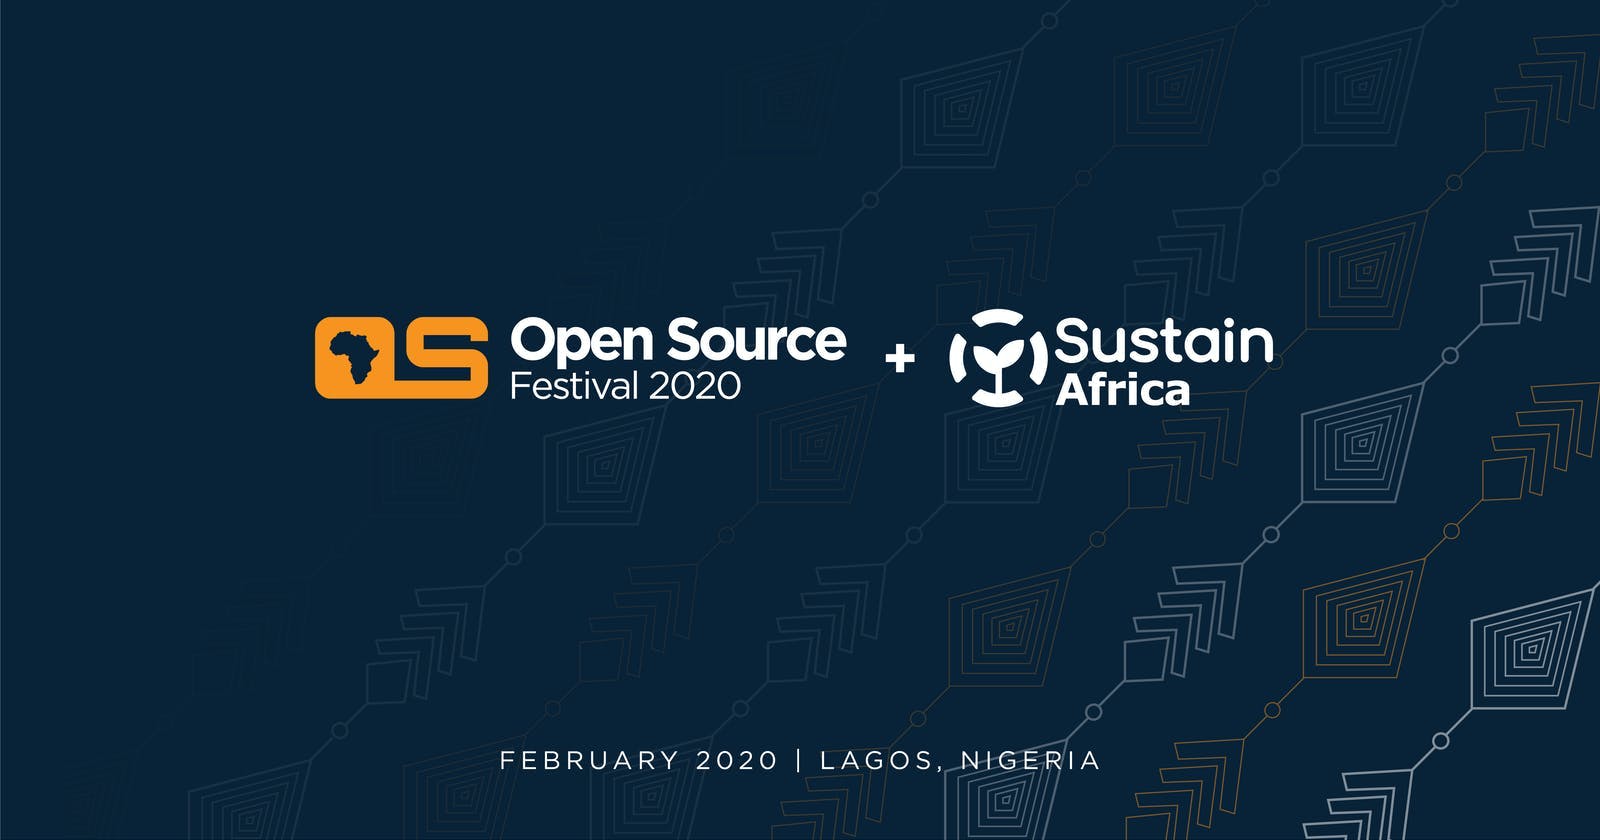 Open Source Festival 2020: Updates and Highlights